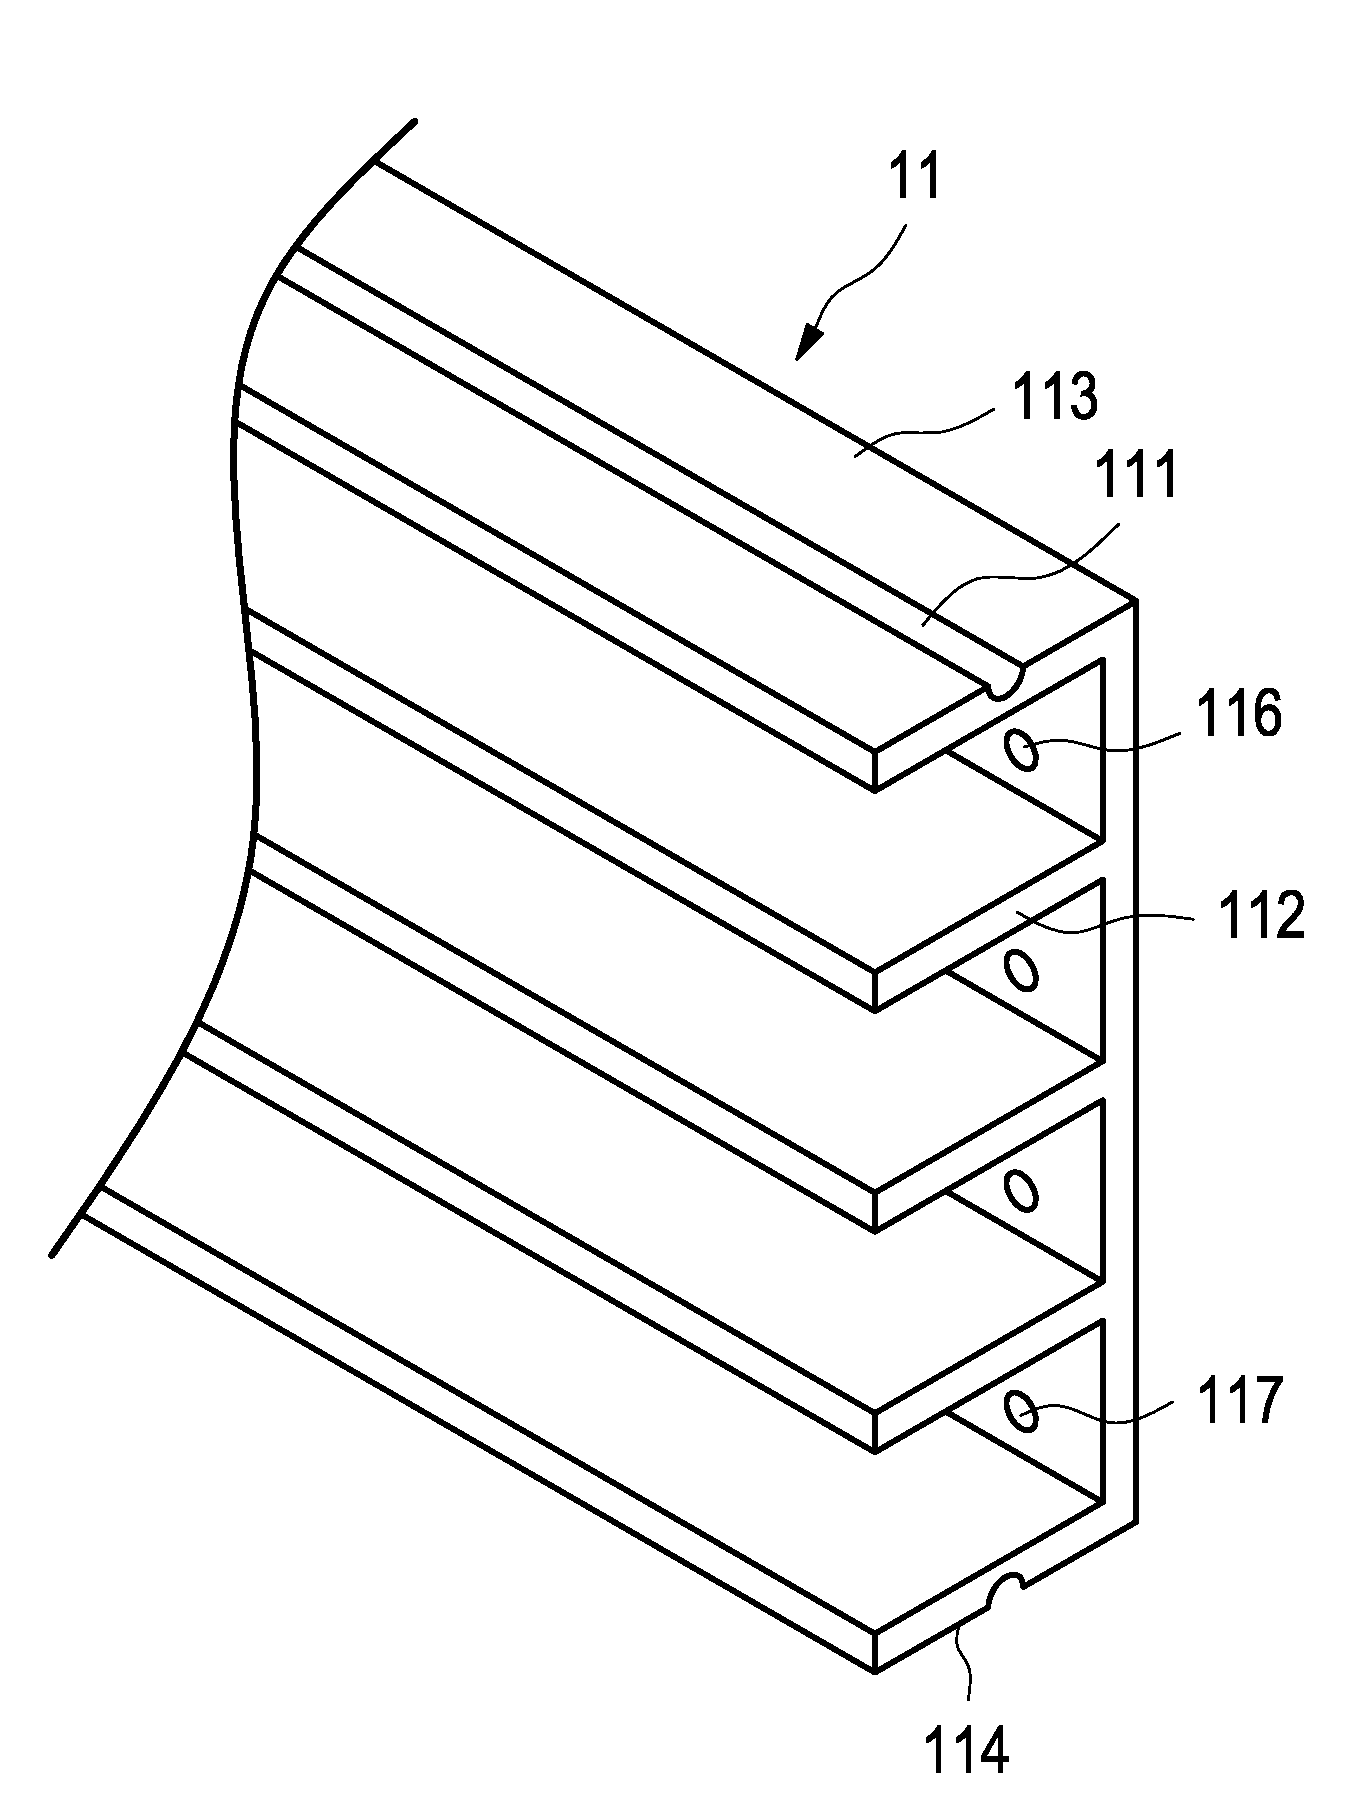 Scrubboard Capable of Receiving Wirings Therein